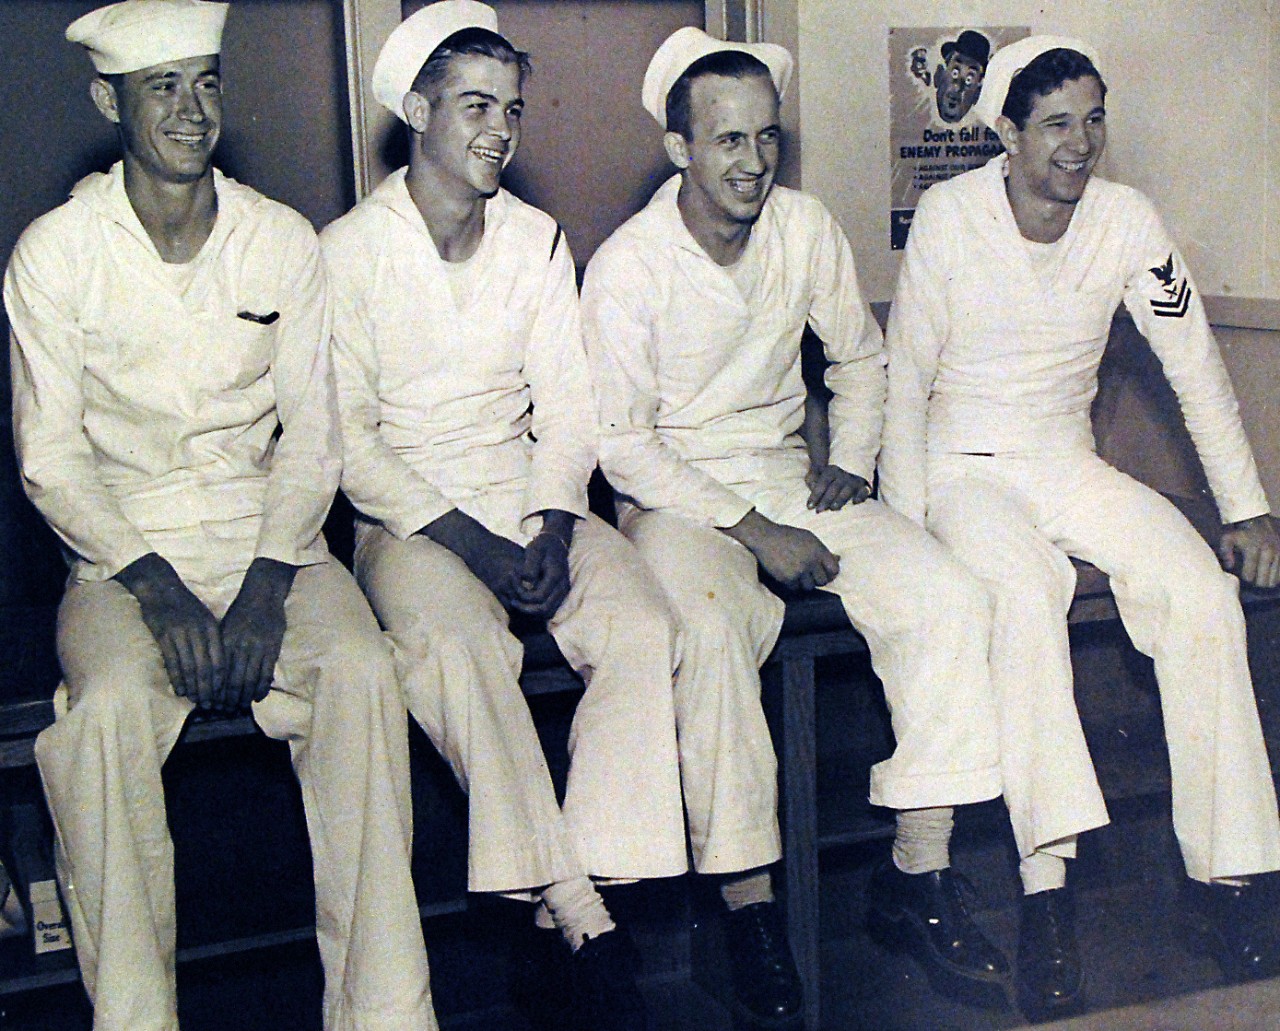 <p>80-G-41737: Operation Torch, November 1942. Four sailors, now shipmates on a destroyer witnessed the opening of the U.S. Campaign in North Africa, November 8, 1942, from four different points of view. Left to right are: Y3/C James C. Johnston; F1/C John W. McKenna; F2/C Robert P. Wolcott and Y2/C Edwin L. Young. Johnston was on a cargo ship; McKenna was on an aircraft carrier; Wolcott was on a landing party, and Young on a cruiser. Photographed June 3, 1943.&nbsp;</p>
